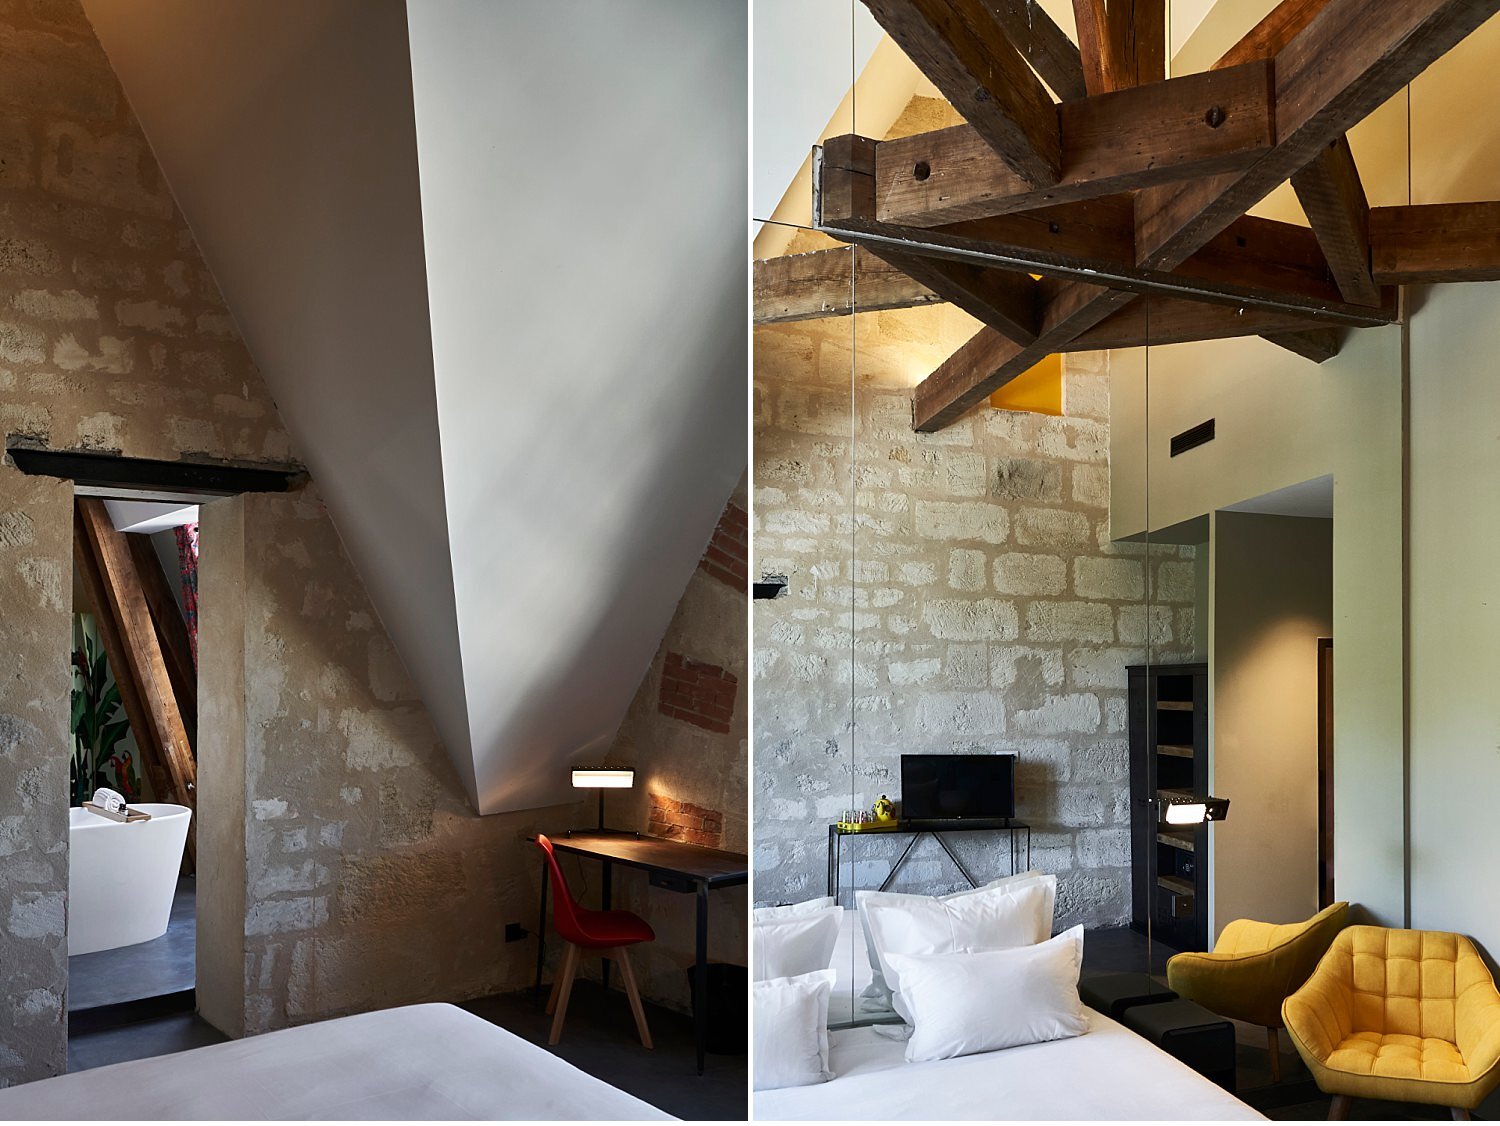  New hotel in Bordeaux, La Zoologie, owned by French as the Palazzetto Rosso in Siena and other hotels in Paris. The inspiration of the structure is linked to the original origin of the building which was a university zoology pavilion. Recently resto